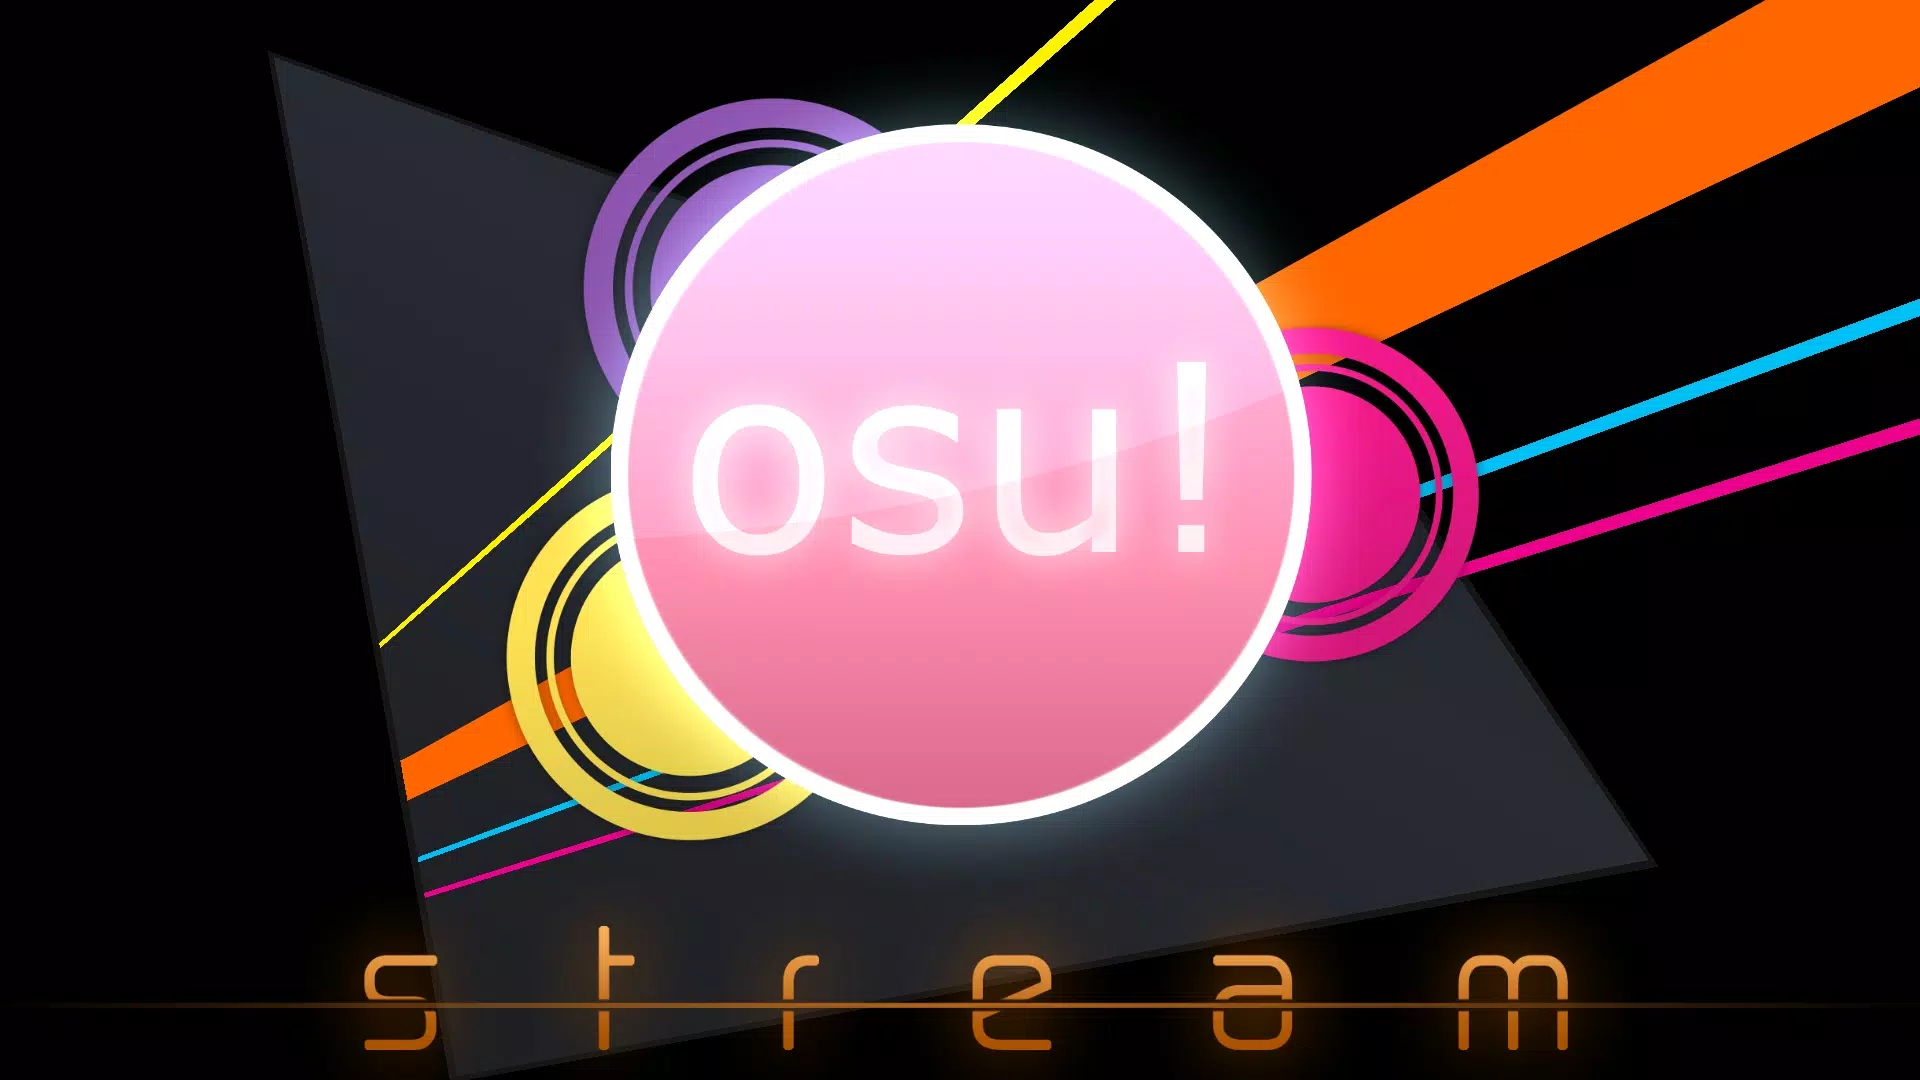 Opsu!(Beatmap player for Andro - Apps on Google Play